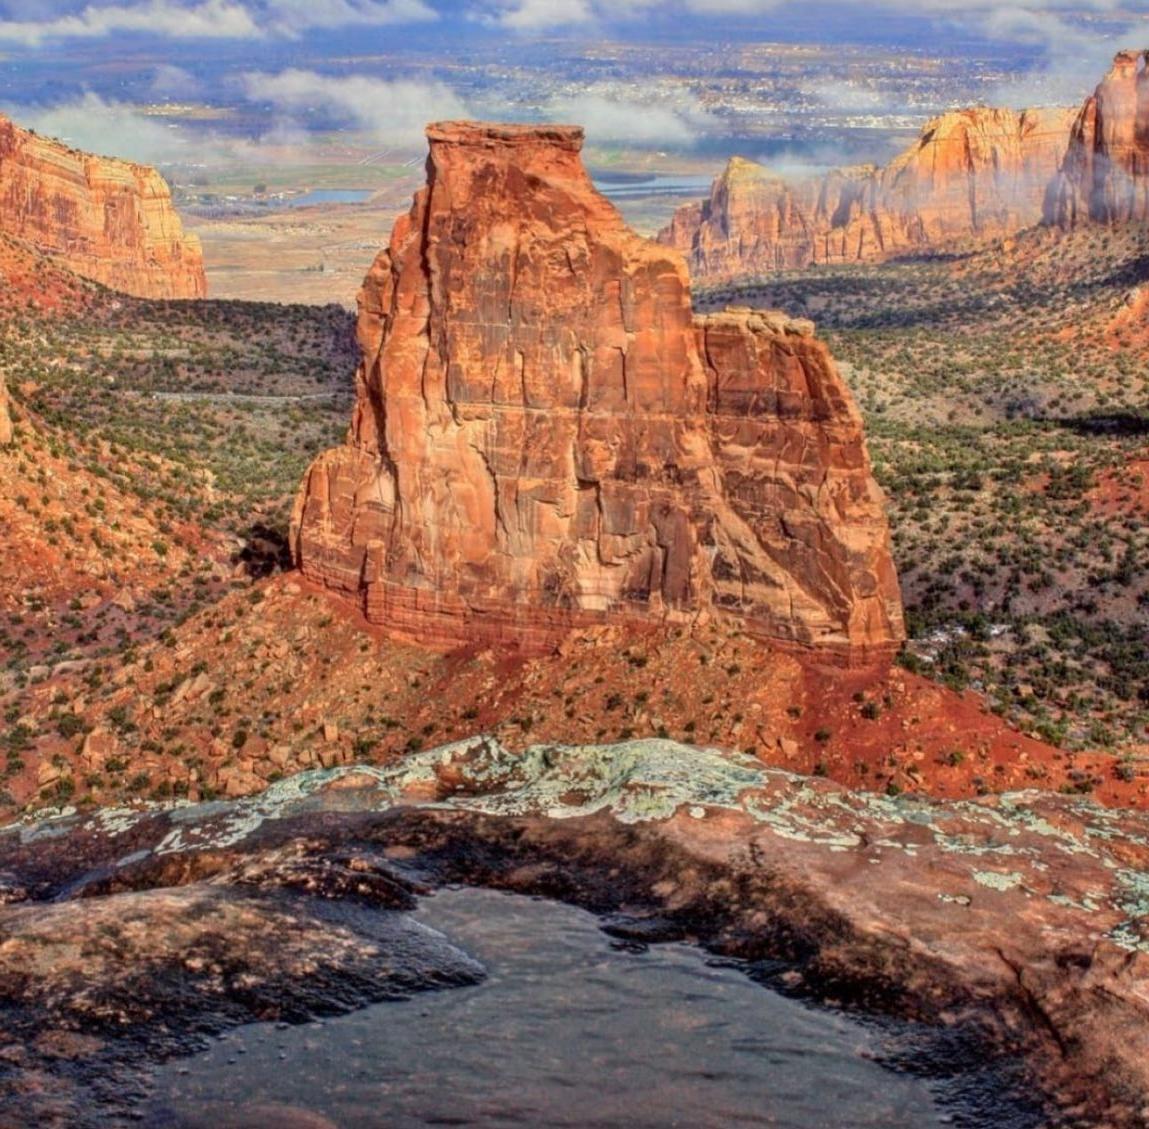 Breathtaking high desert canyons of the Colorado National Monument